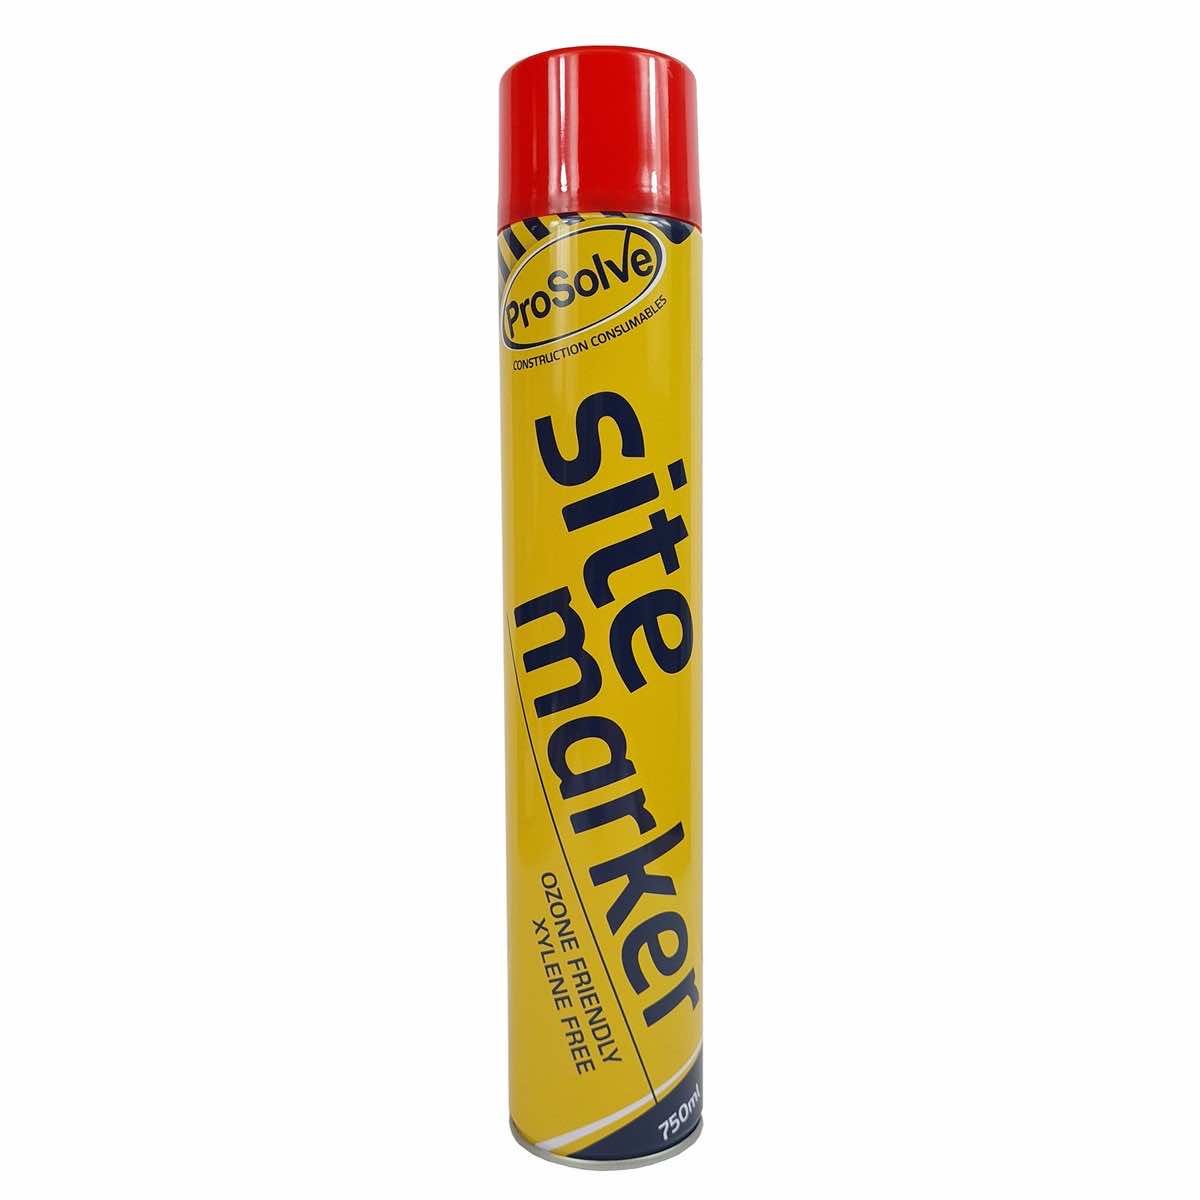 PVSMR7A SITE MARKER 750ML RED